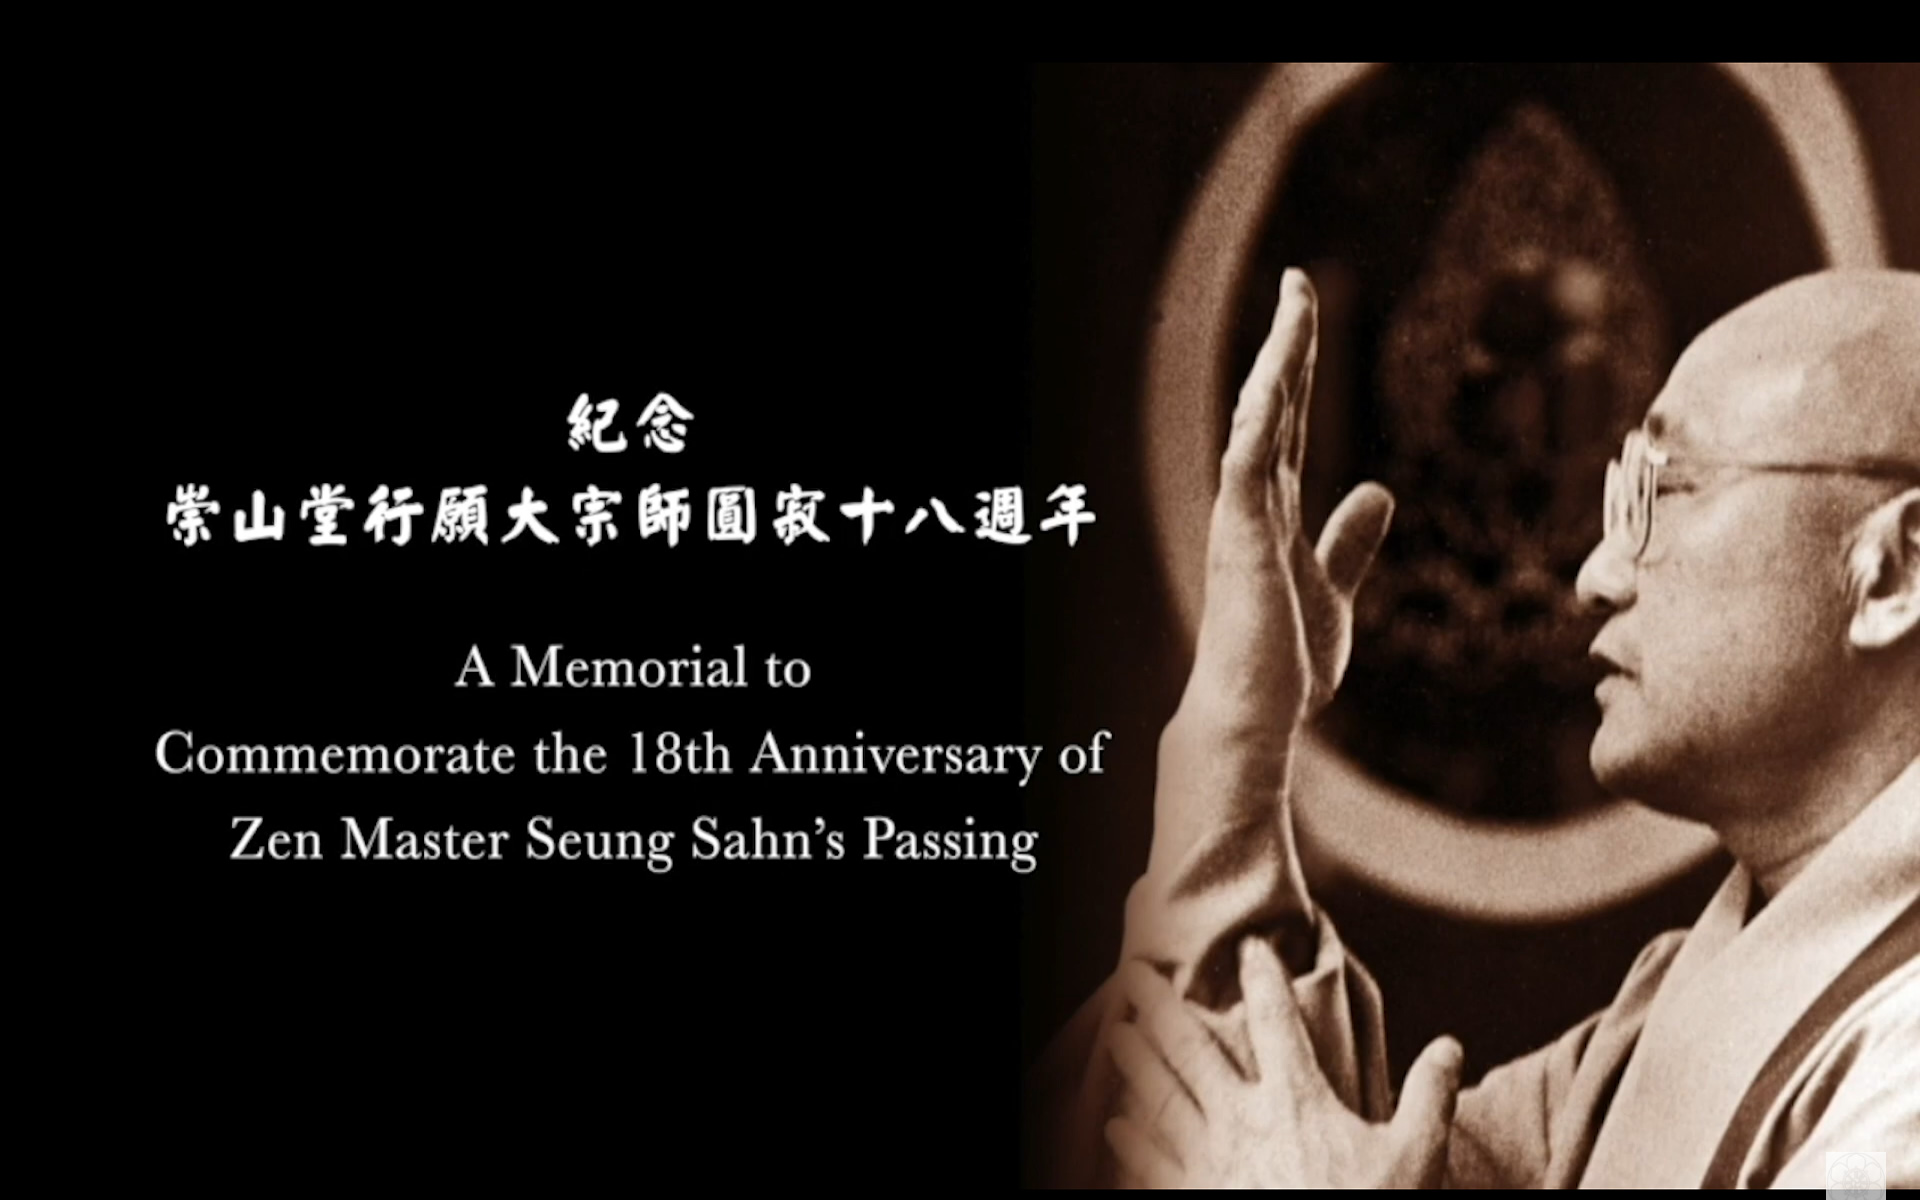 A Memorial to Commemorate the 18th Anniversary of Zen Master Seung Sahn’s Passing